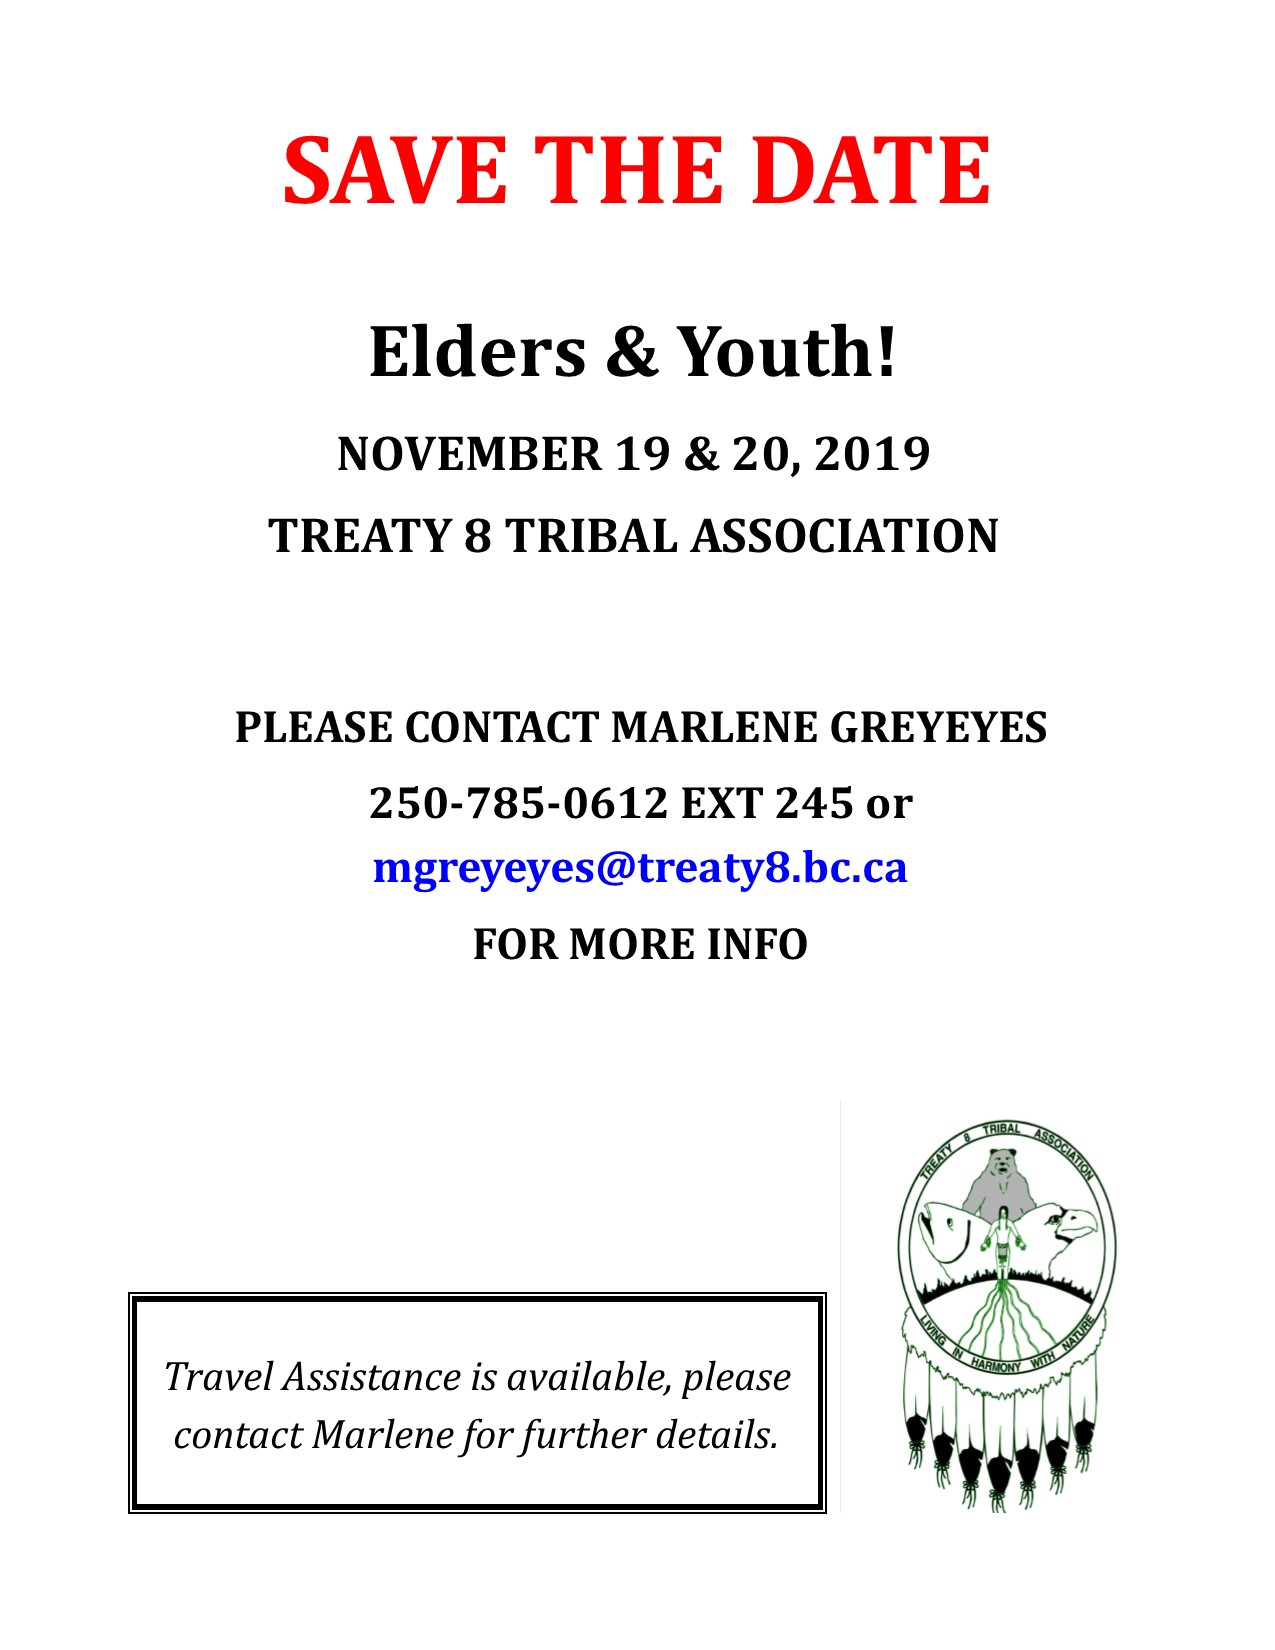 ELDERS AND YOUTH!! Save the Date @ Treaty 8 Tribal Association